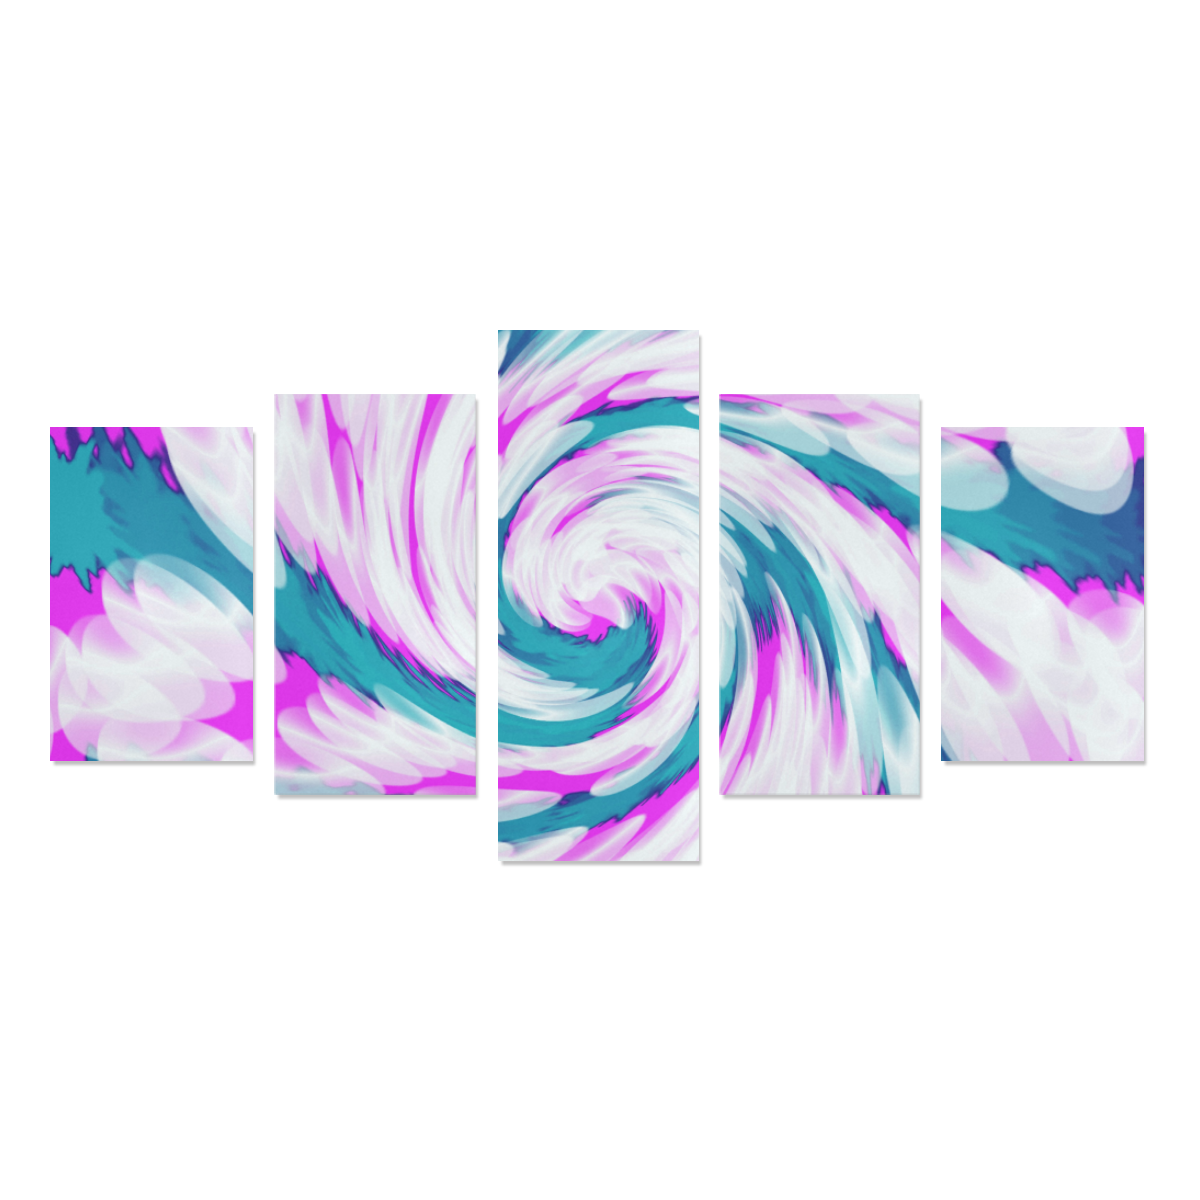 Turquoise Pink Tie Dye Swirl Abstract Canvas Print Sets C (No Frame)